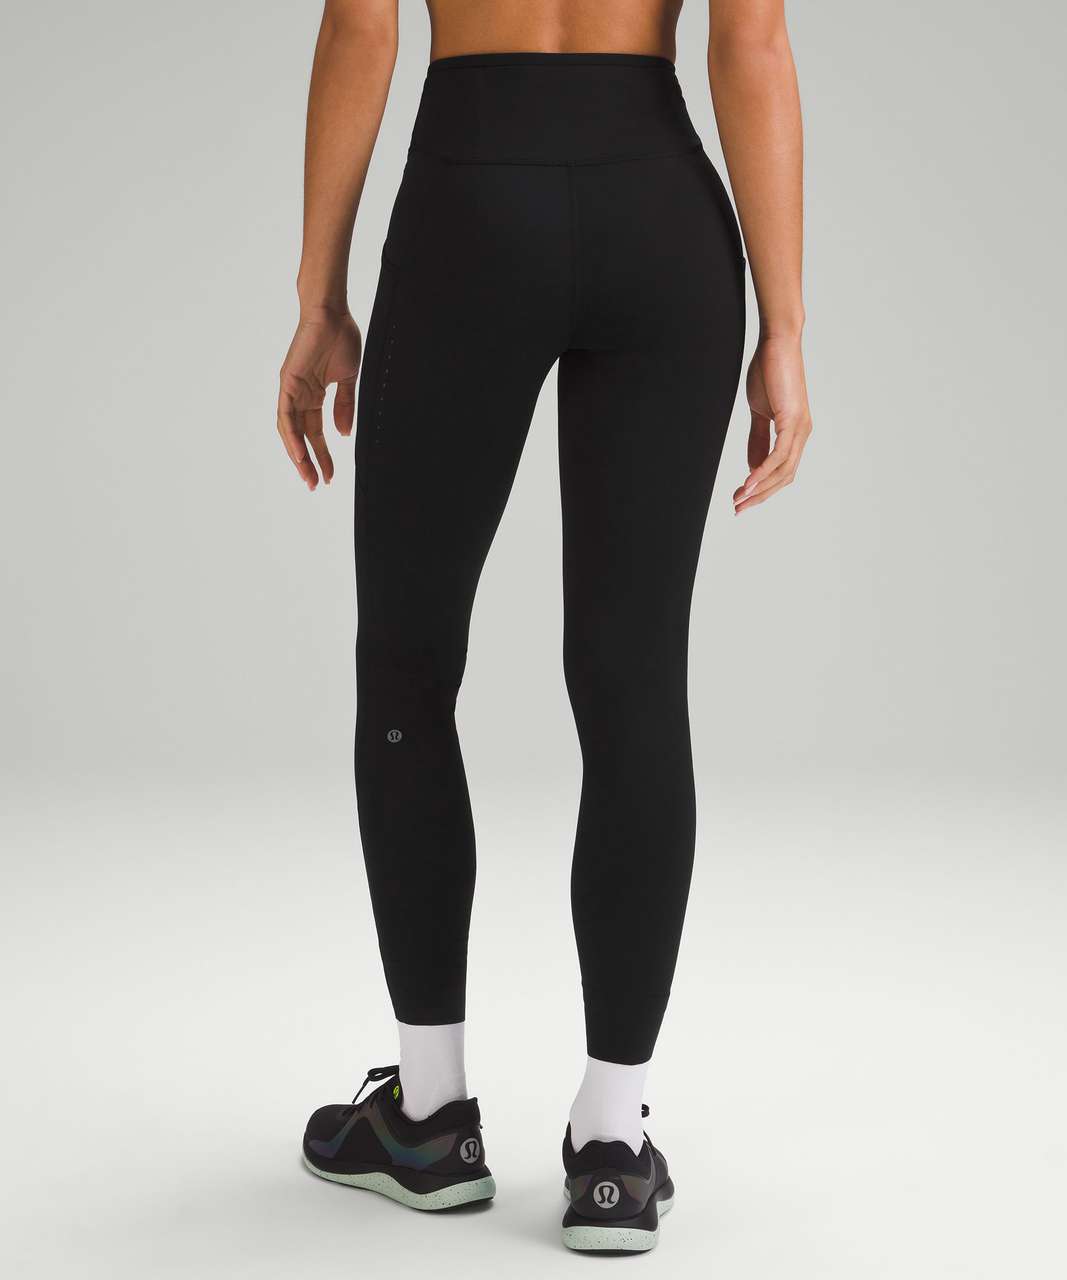 Lululemon Fast and Free High-Rise Tight 28" *Pockets - Black